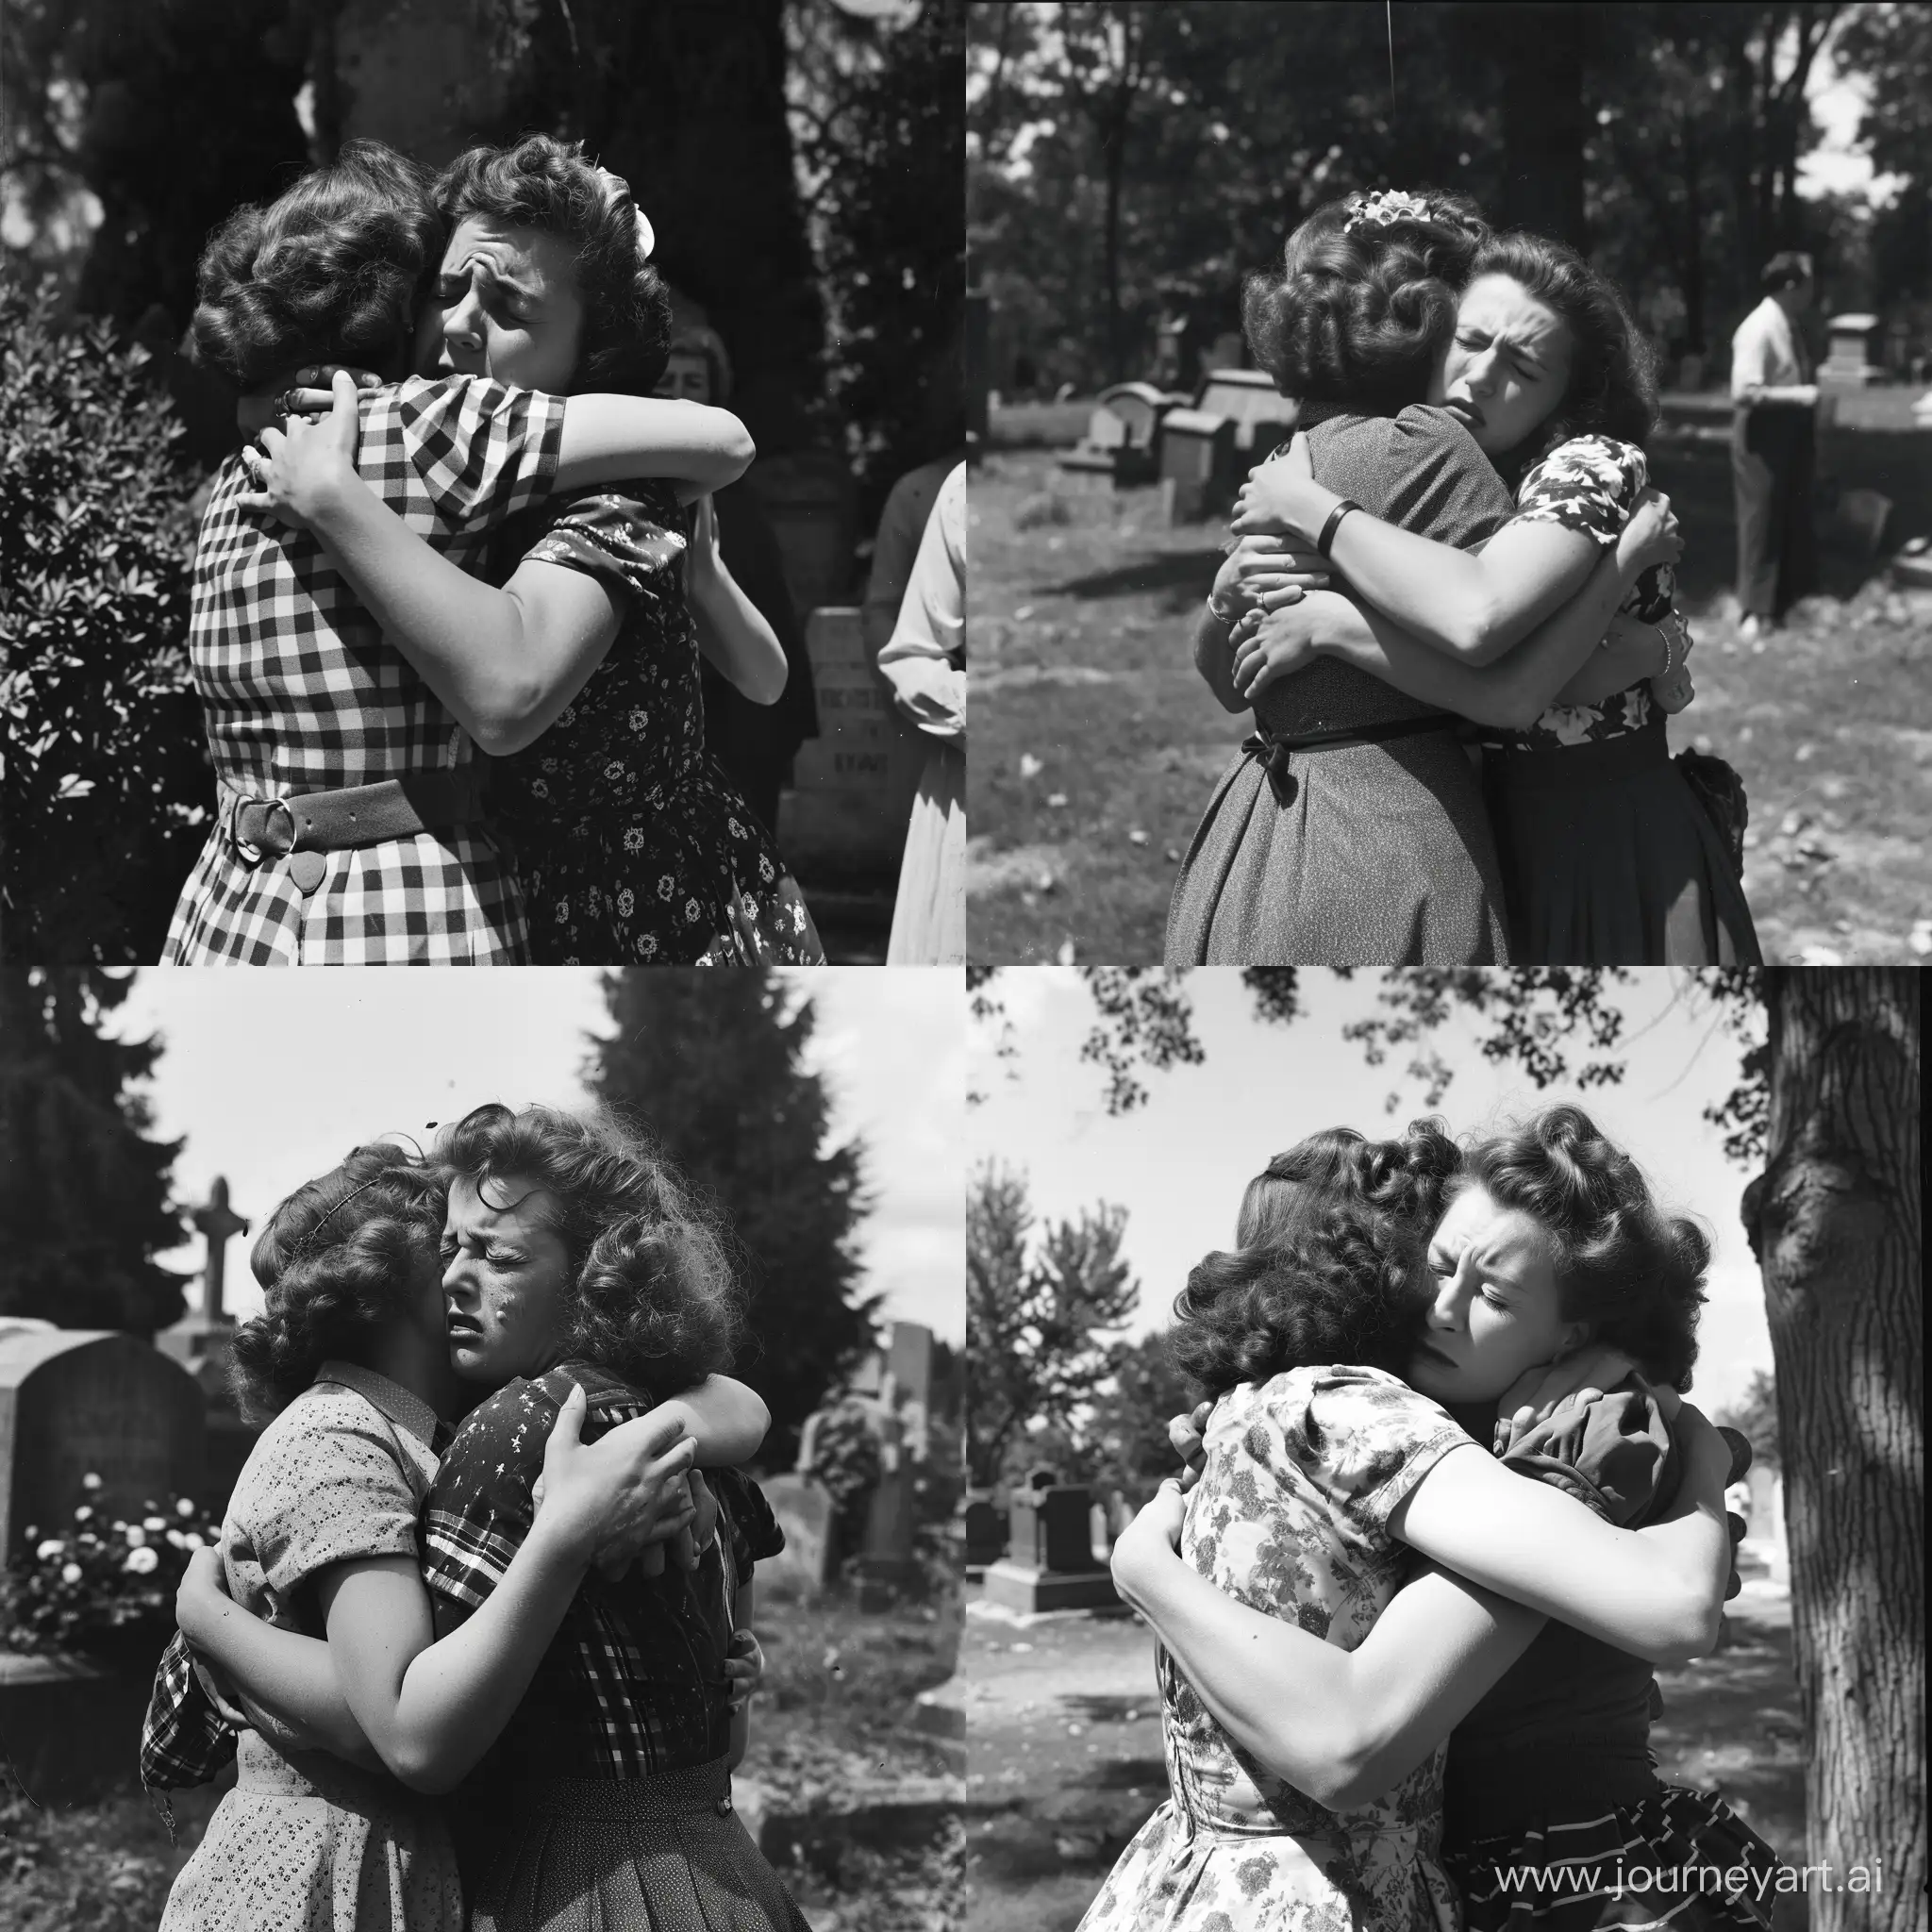 Lesbian european french and short sleeves puffy compression 1950s Photo  hug  kisse arm crying wail cemetery